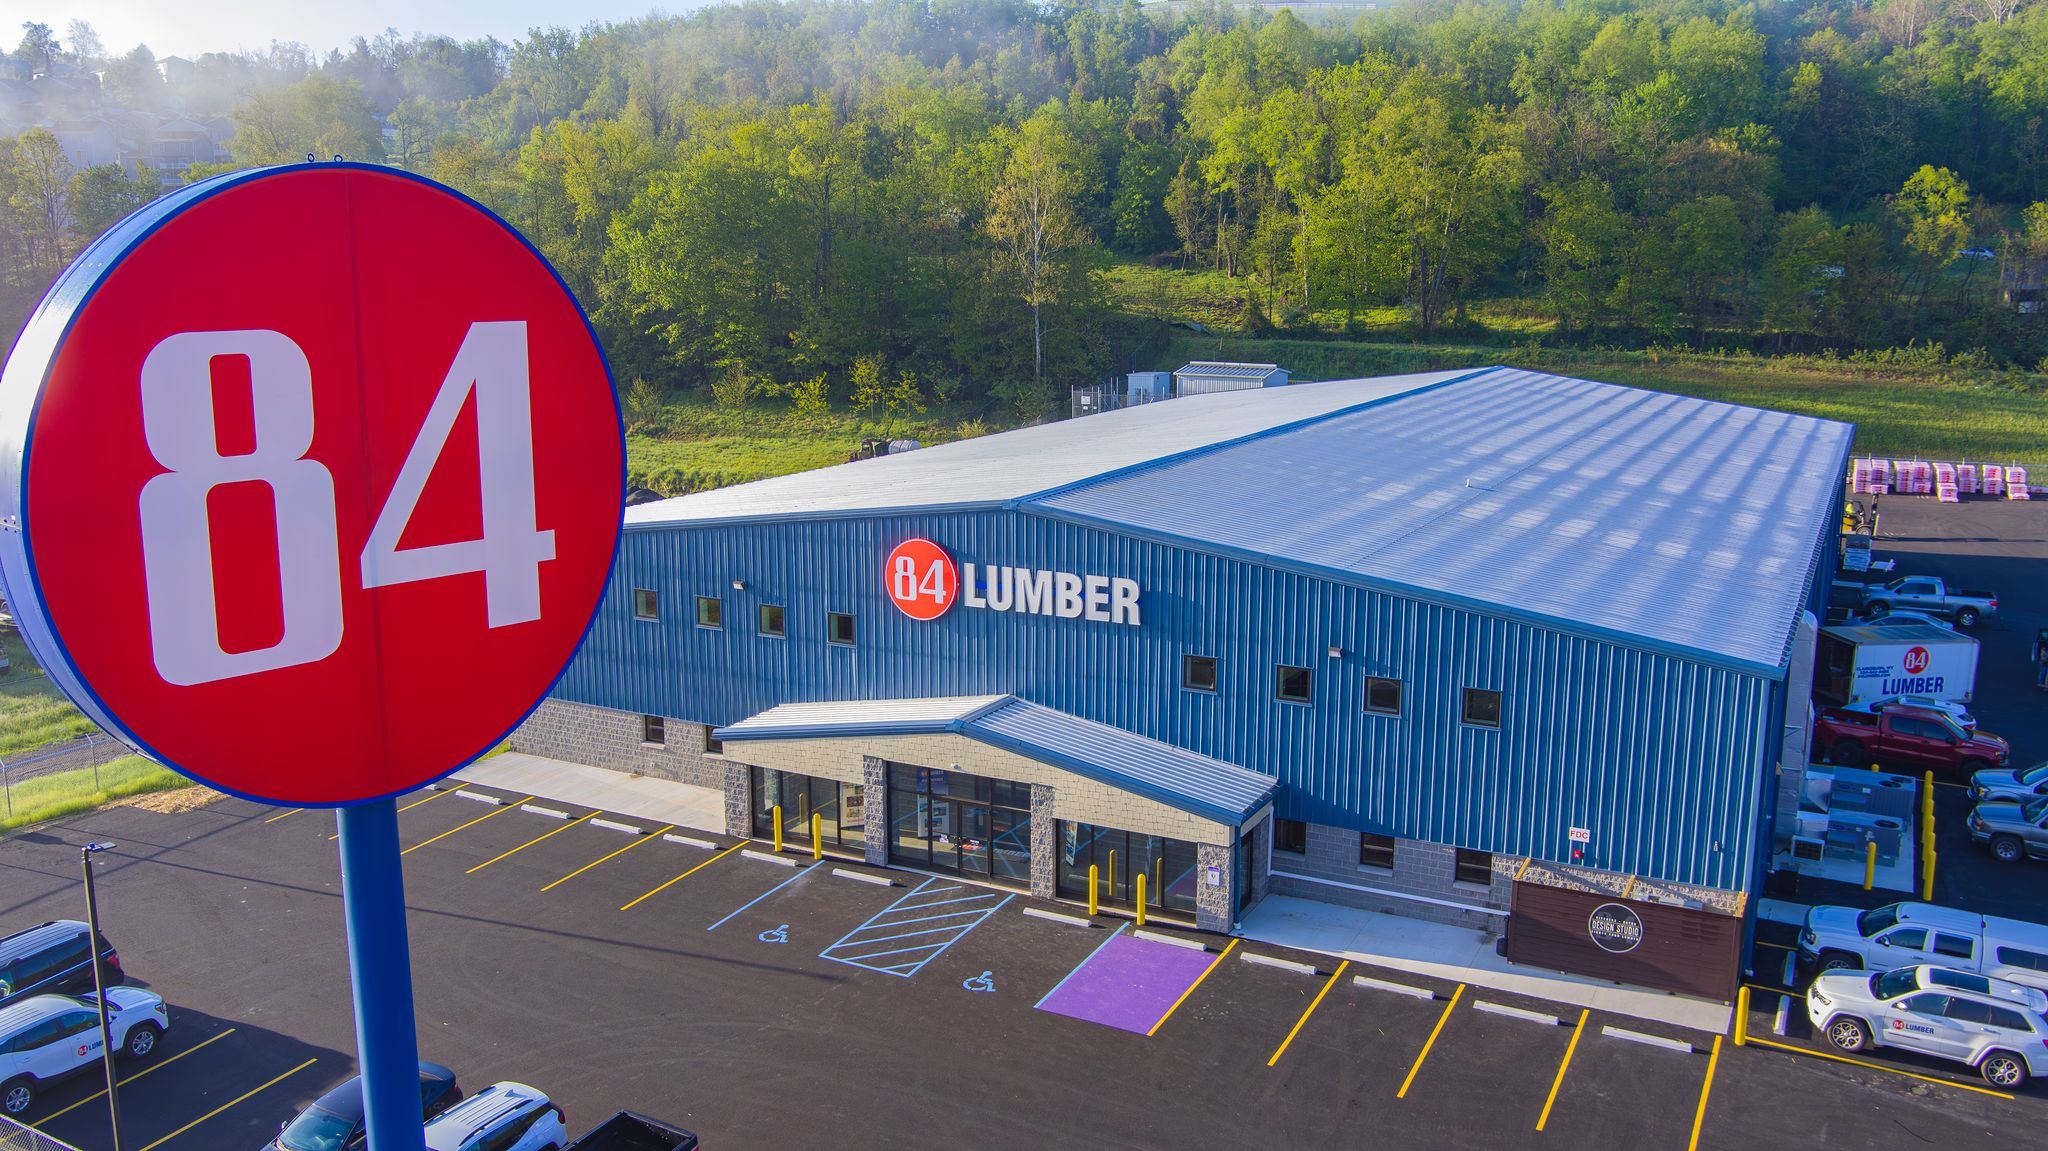 Exterior Photo of our New Morgantown Location with our 84 Lumber Ball 